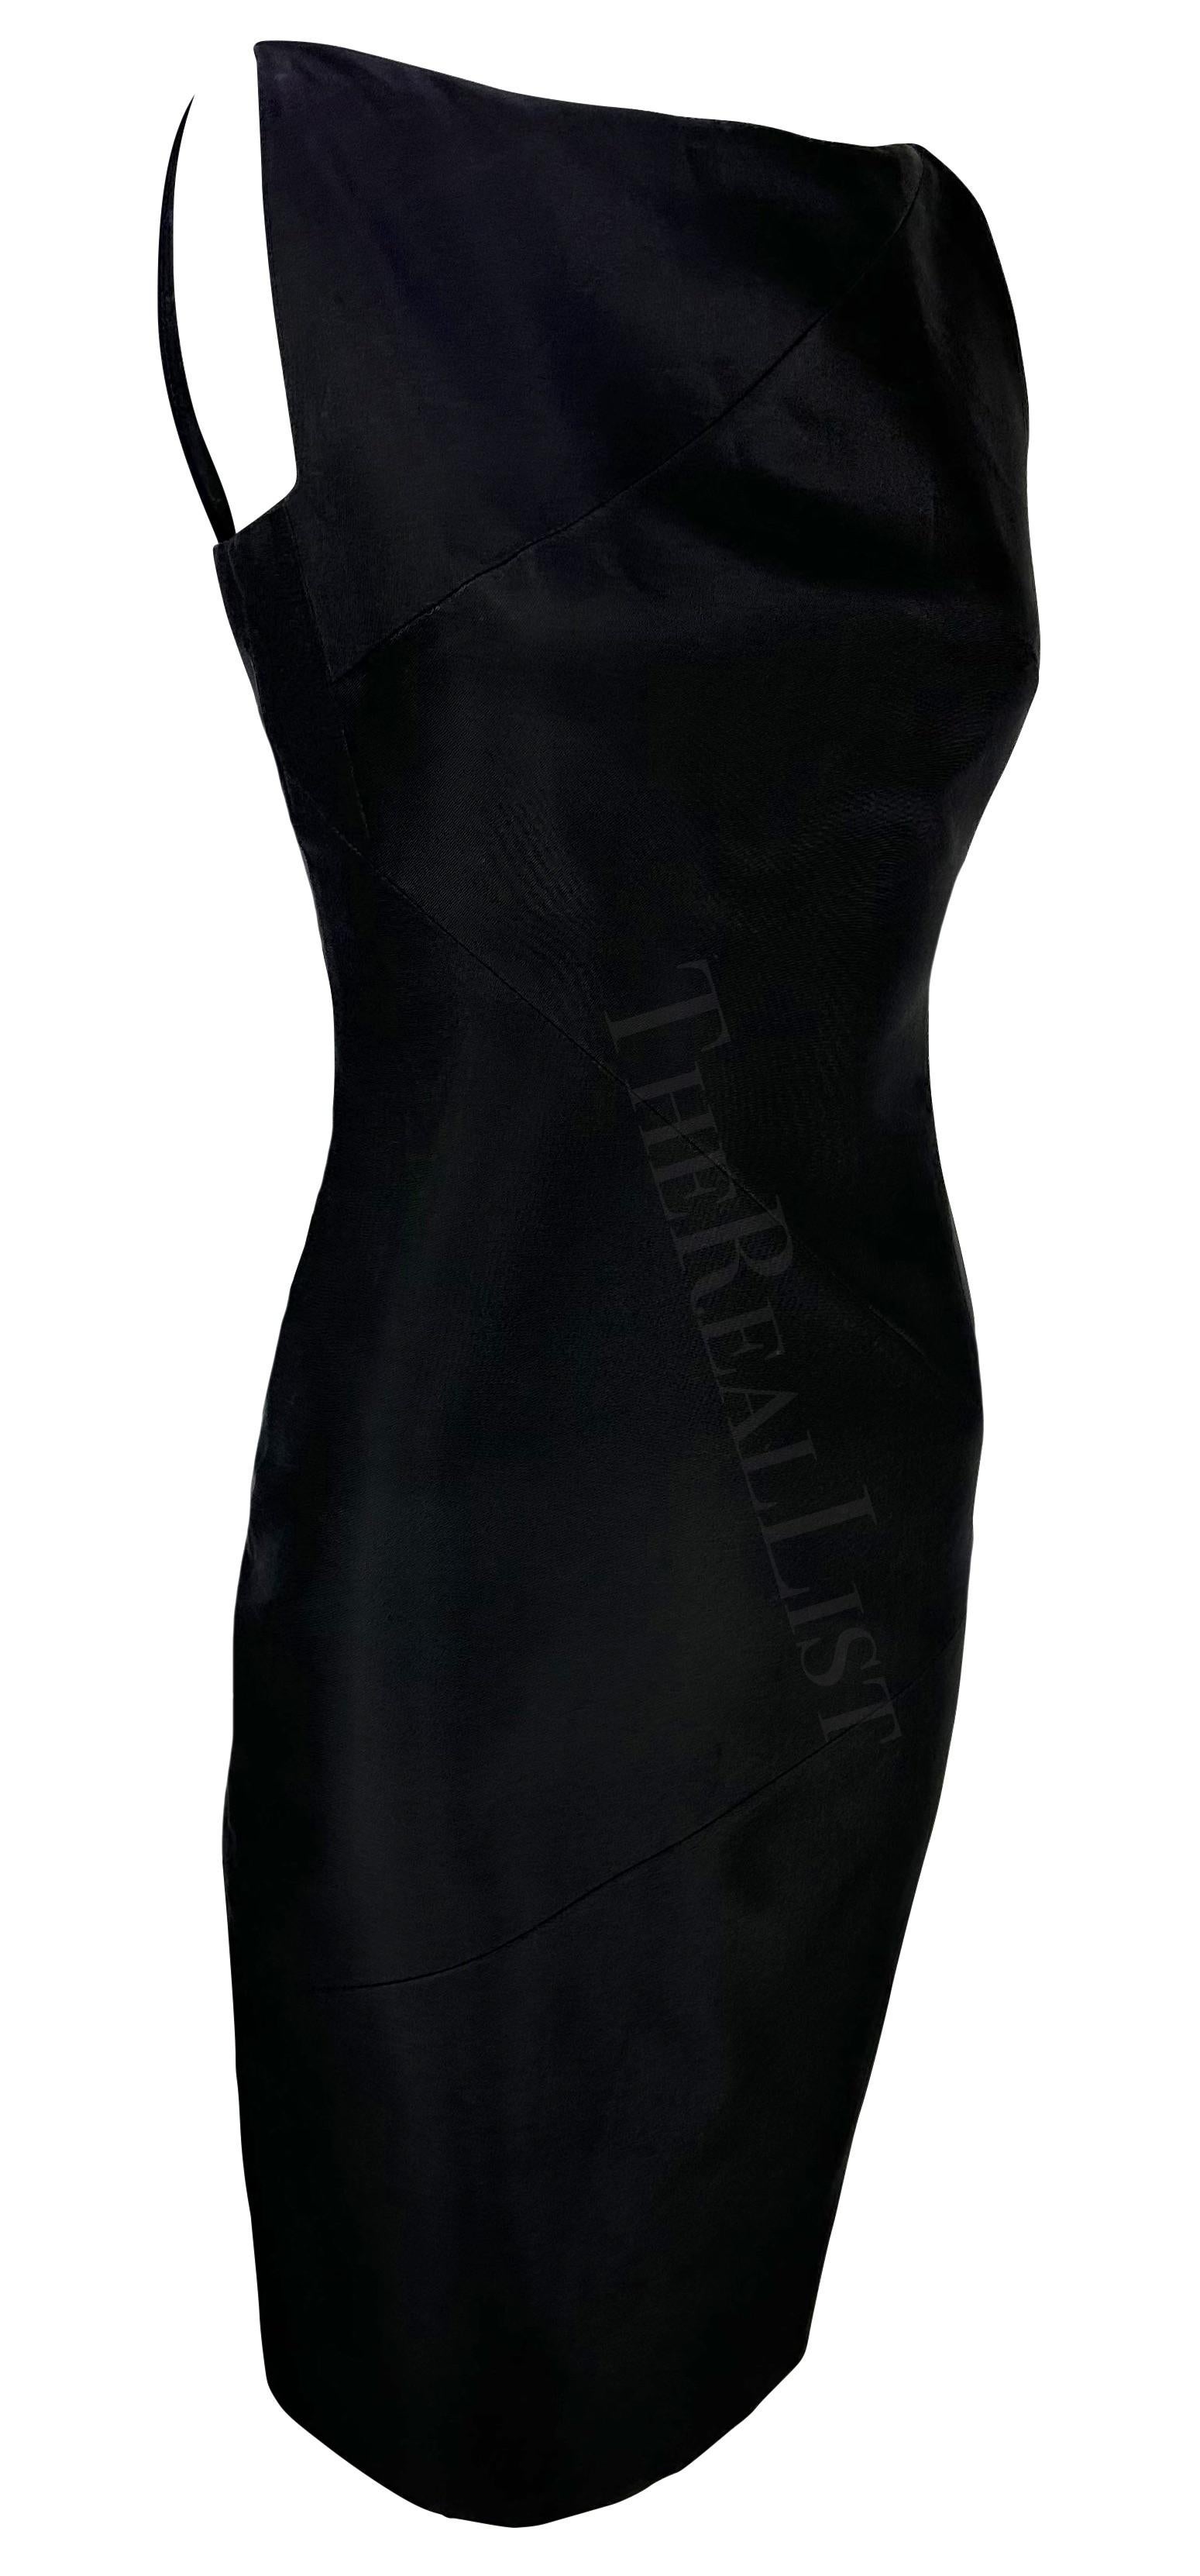 S/S 1998 Gucci by Tom Ford Runway Black Sleeveless Panel Bodycon Bateau Dress For Sale 4